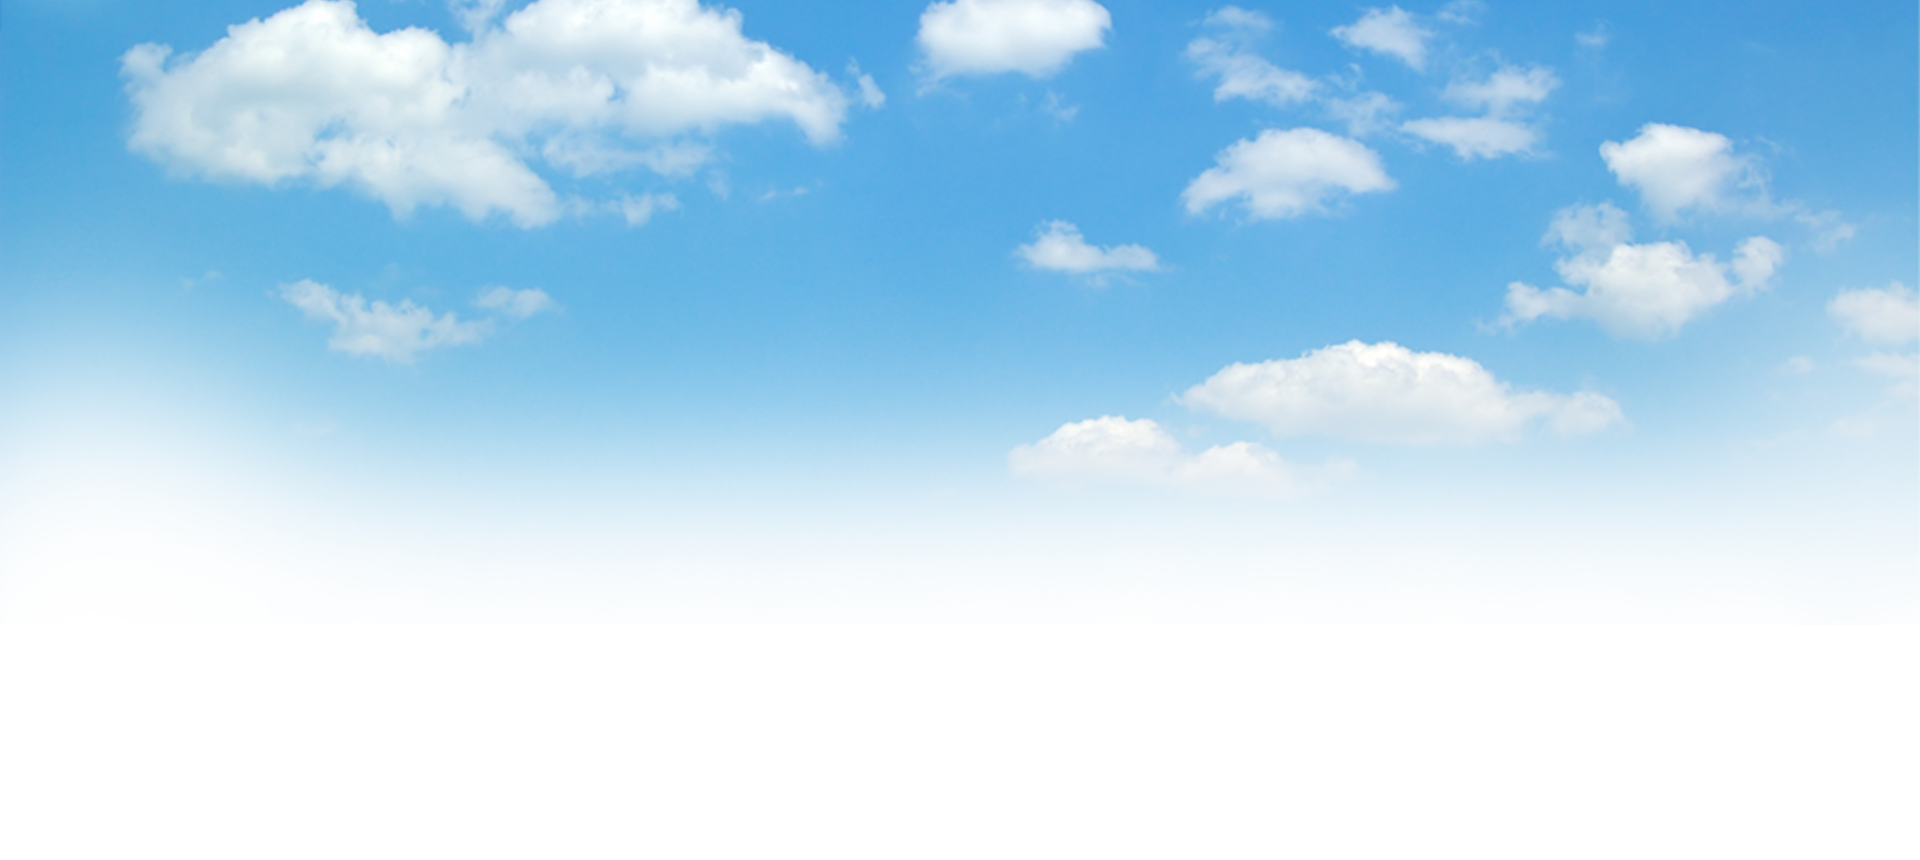 Blue And White Sky Clouds Free Transparent Image HD Clipart